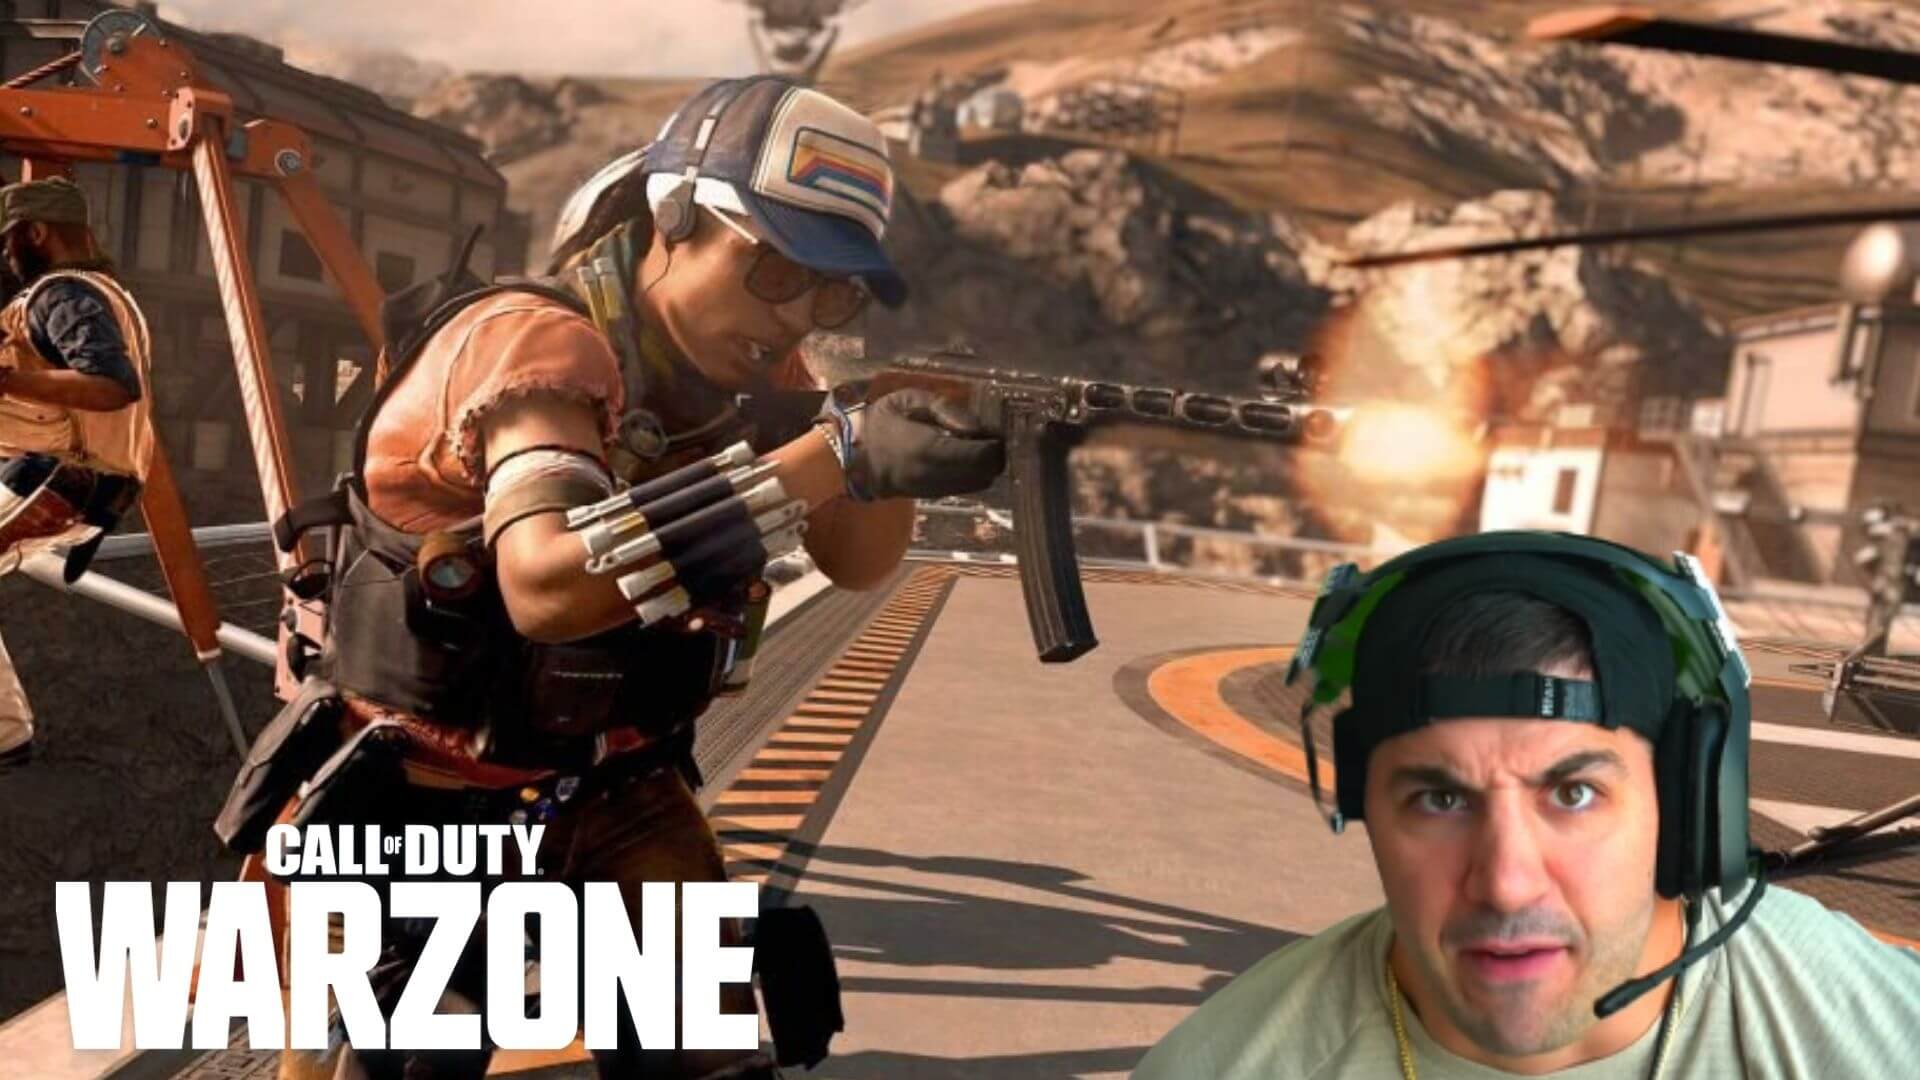 angry nickmercs with warzone gameplay